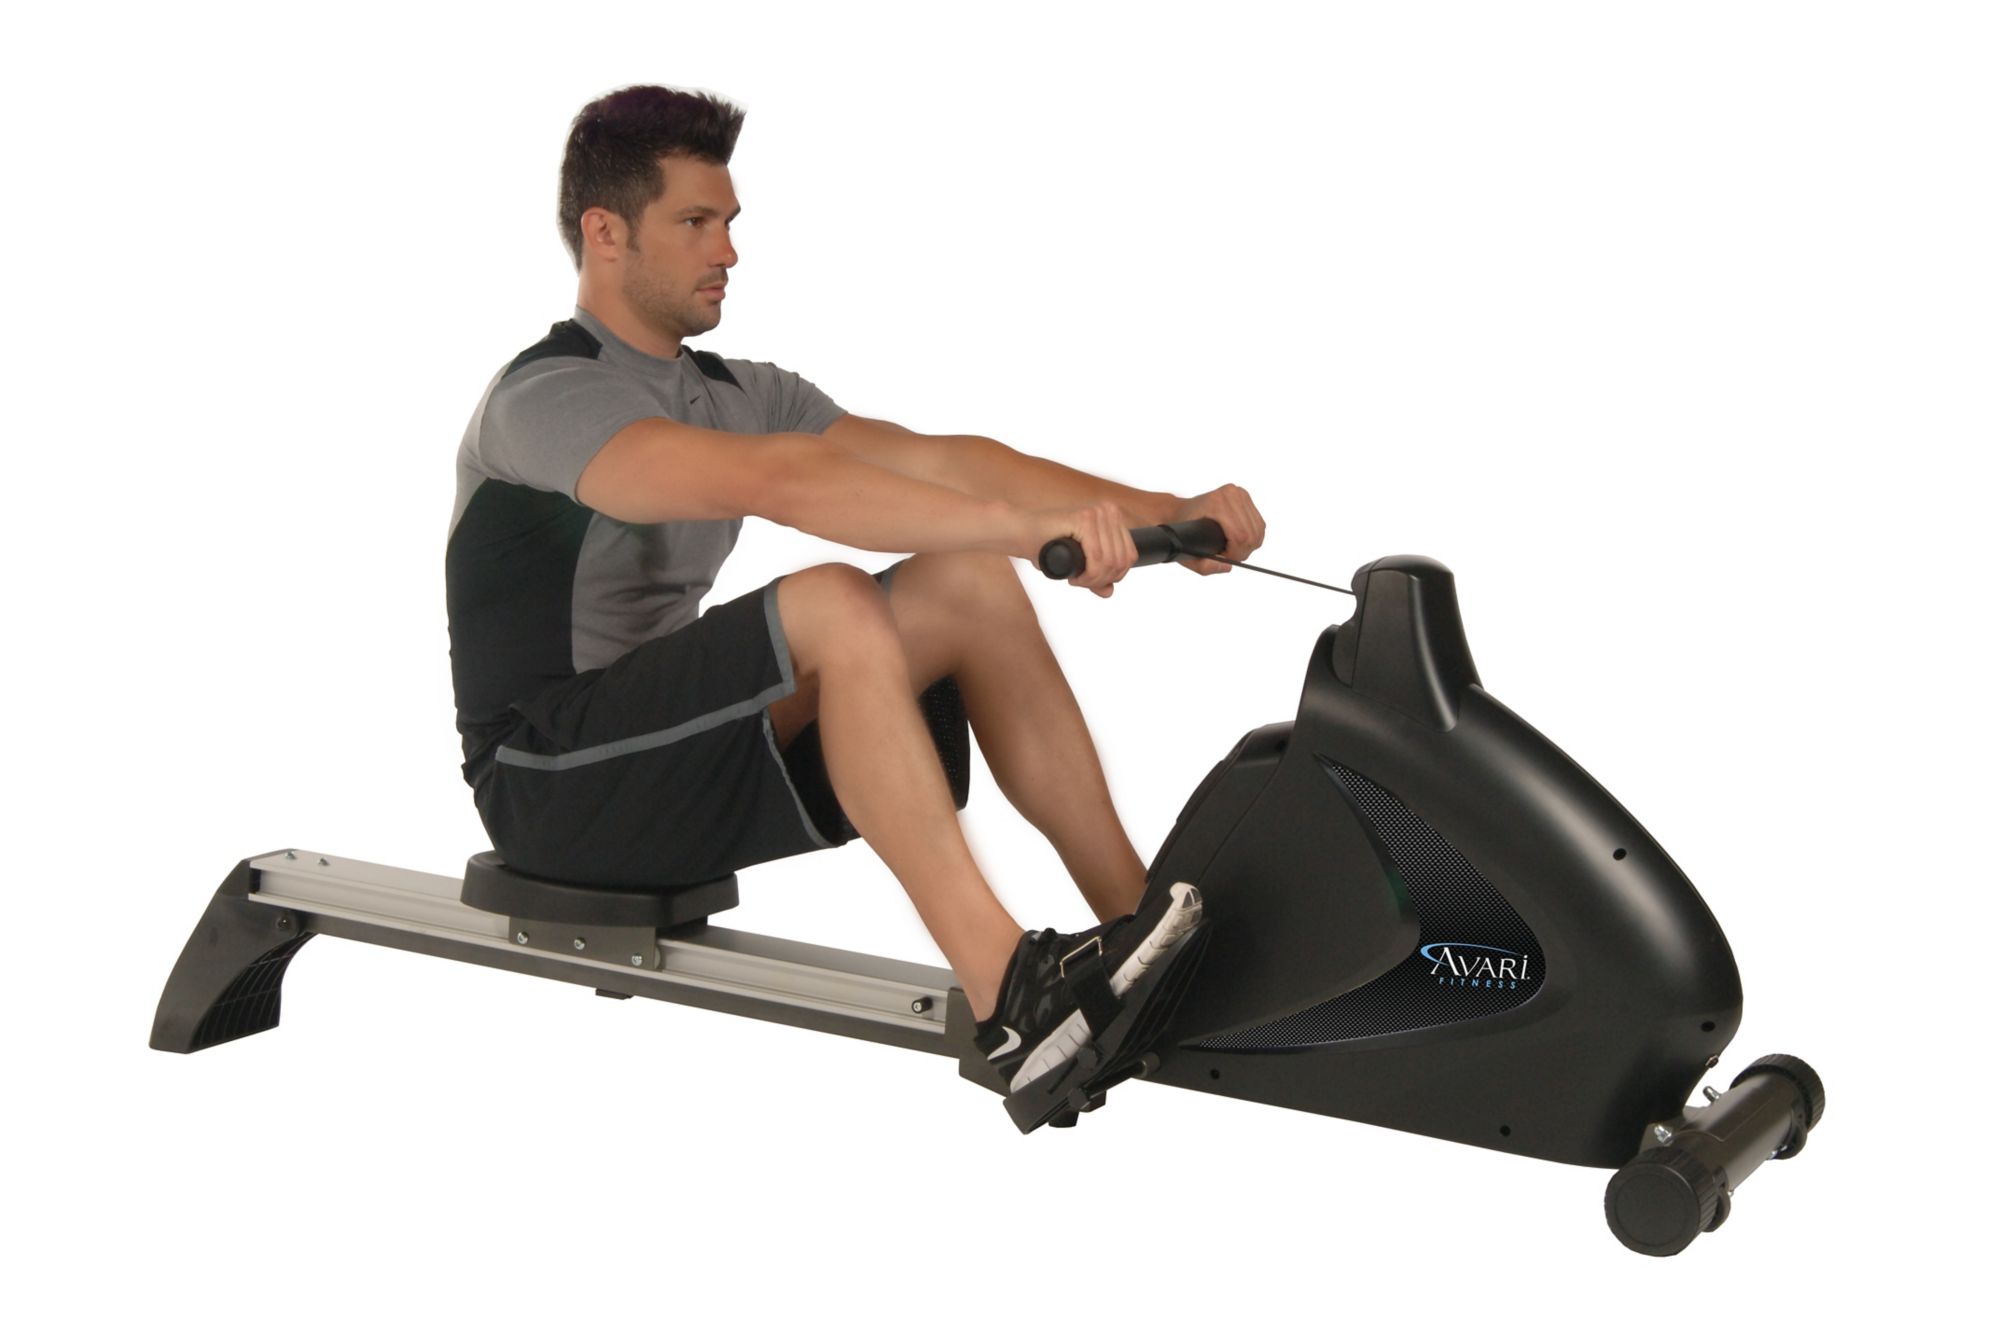 This Popular Magnetic Rower Machine Is on Sale at